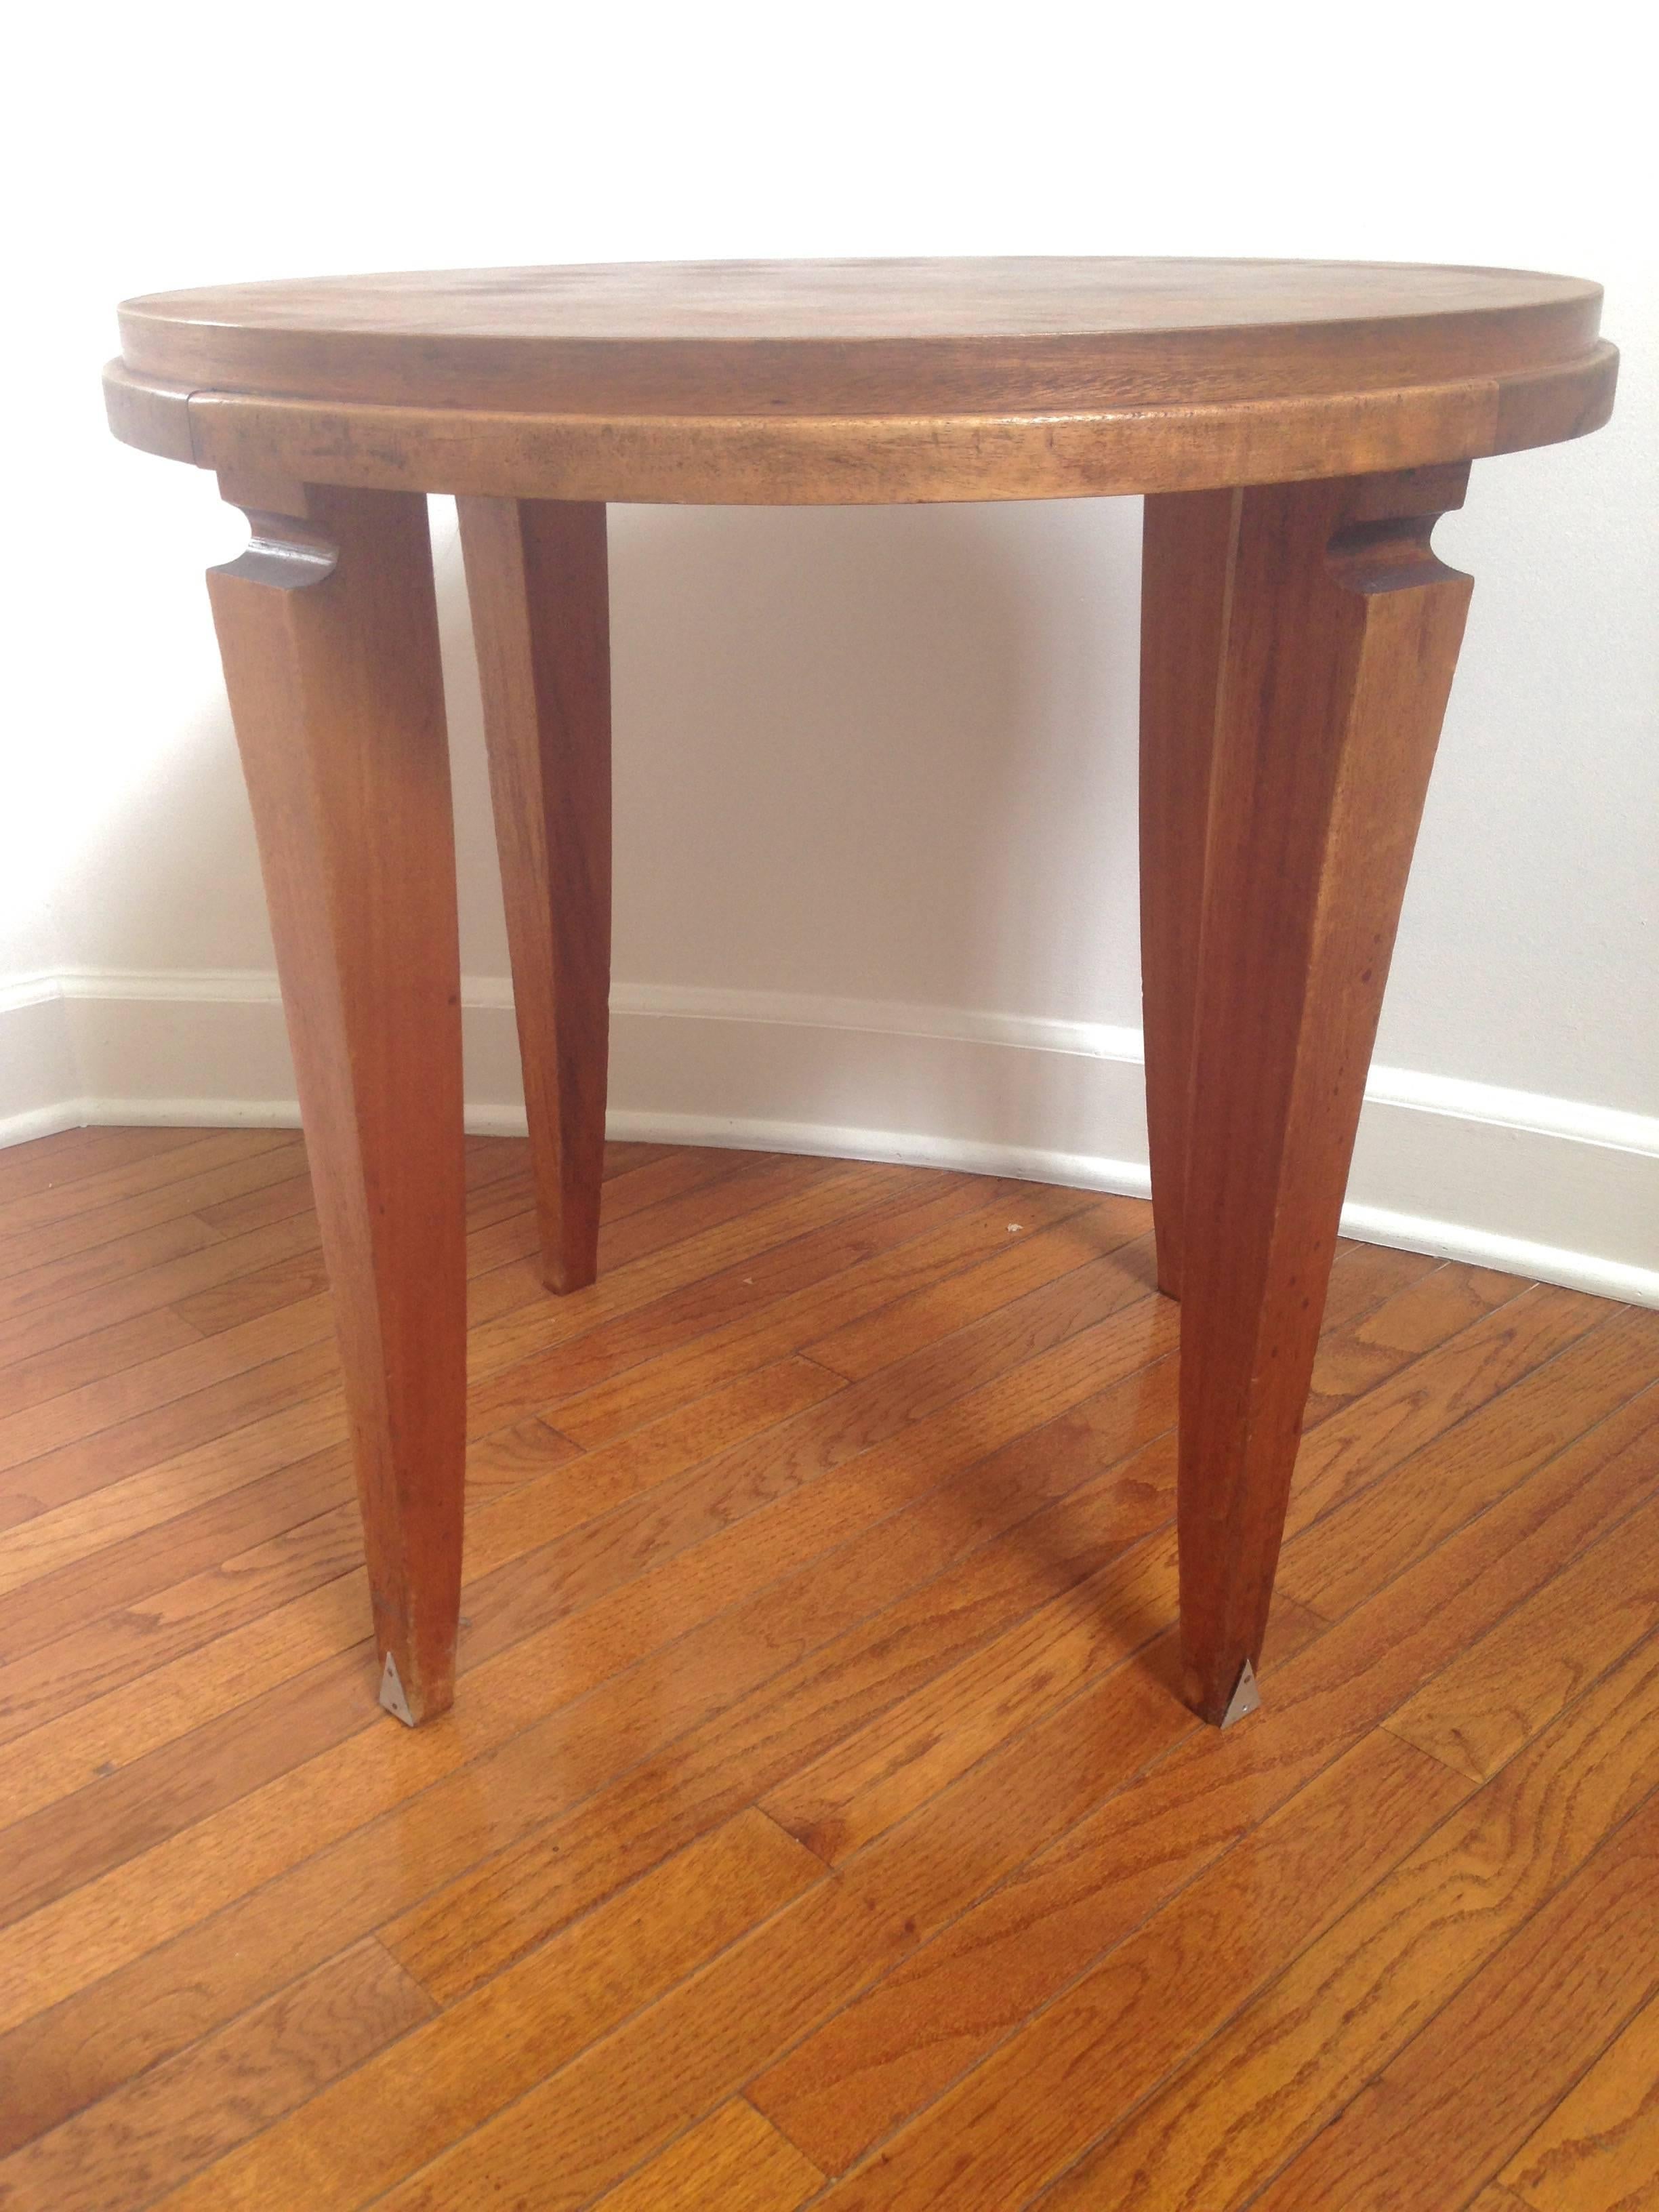 Dominique or Adnet Style French Gueridon or Round Table In Good Condition For Sale In Ashburn, VA